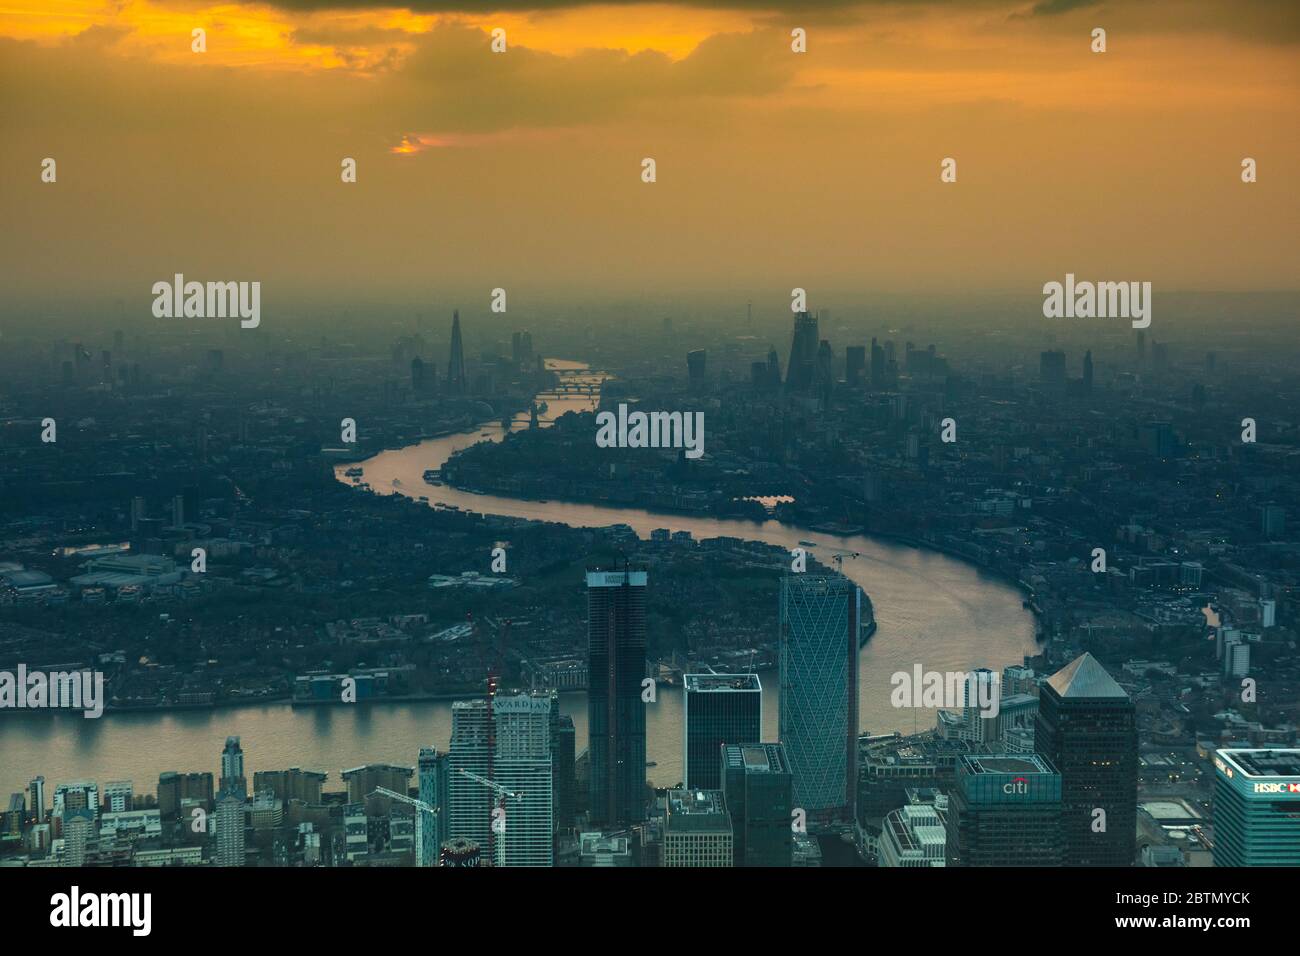 River Thames and the London Skyline at Sunset Stock Photo